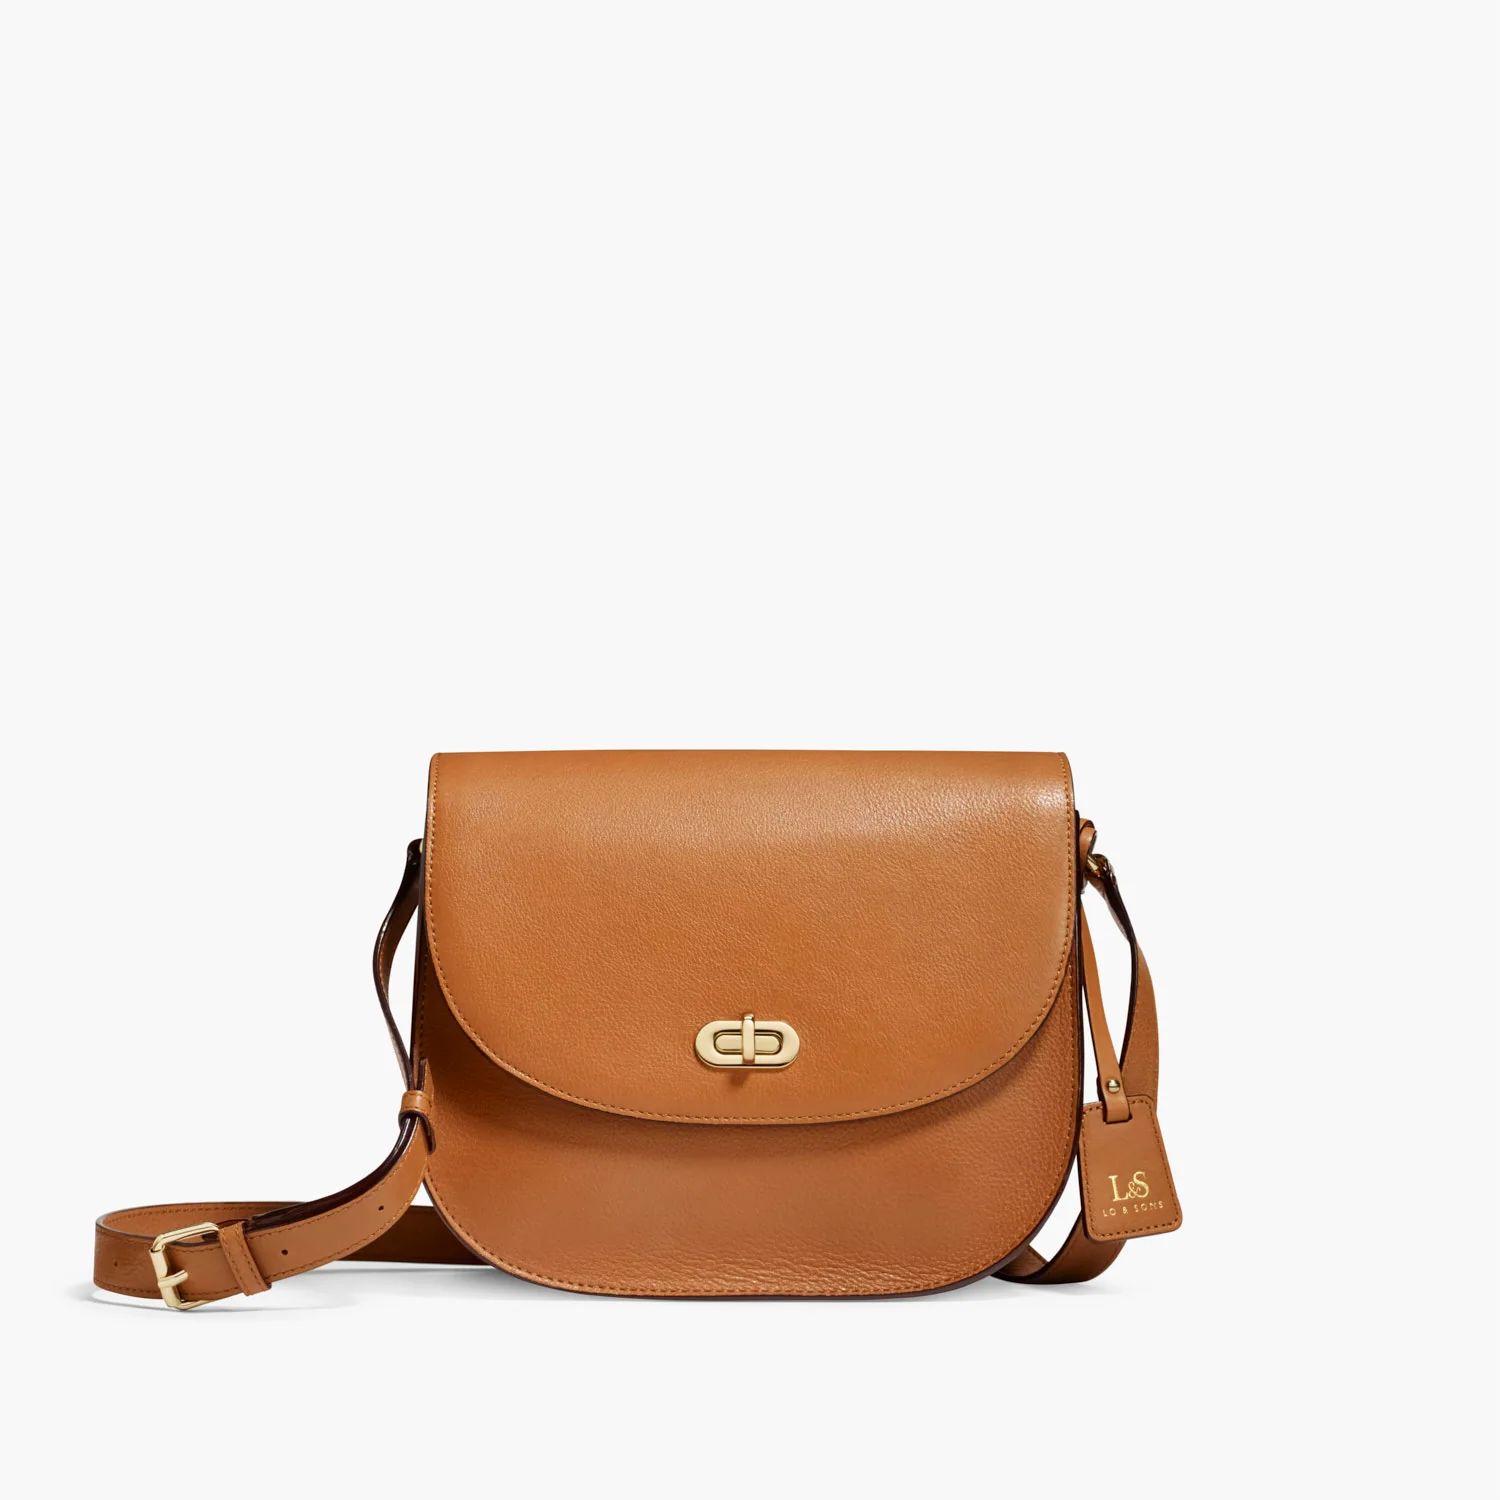 The Claremont: Stylish Leather Camera Bag for Women in Sienna | Lo & Sons | Lo & Sons